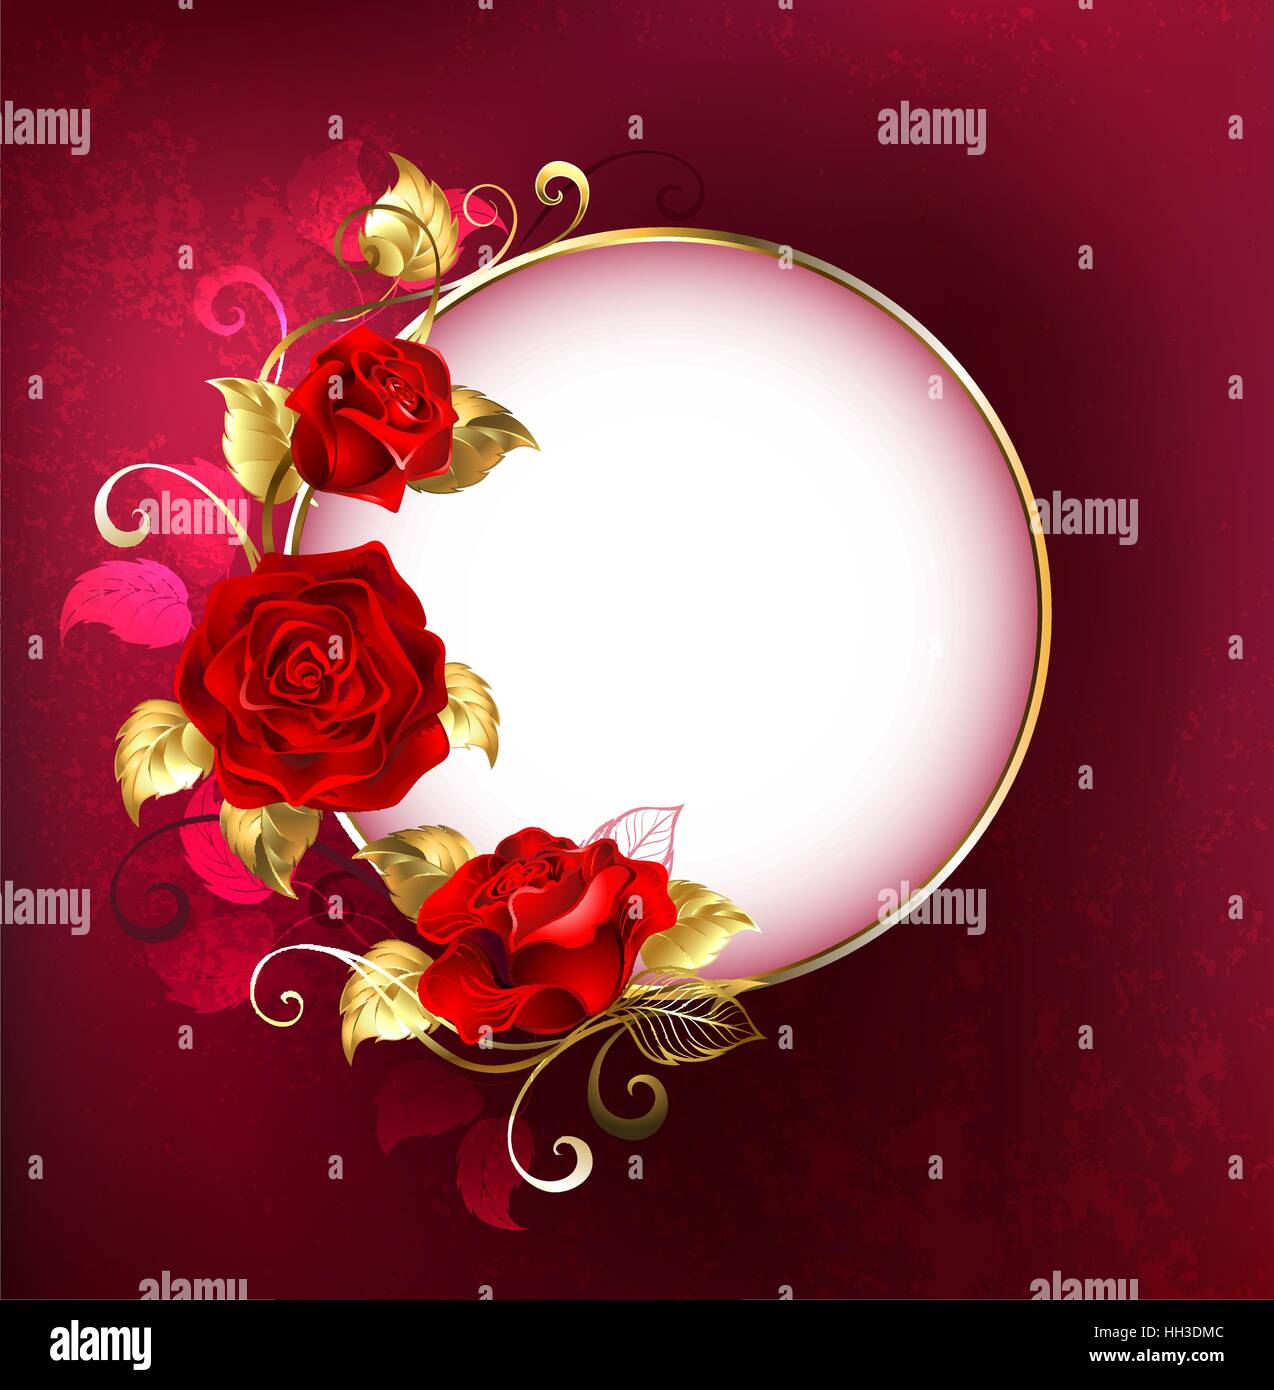 Round white banner with red roses and golden leaves on red textural background. Design with red roses. Stock Vector